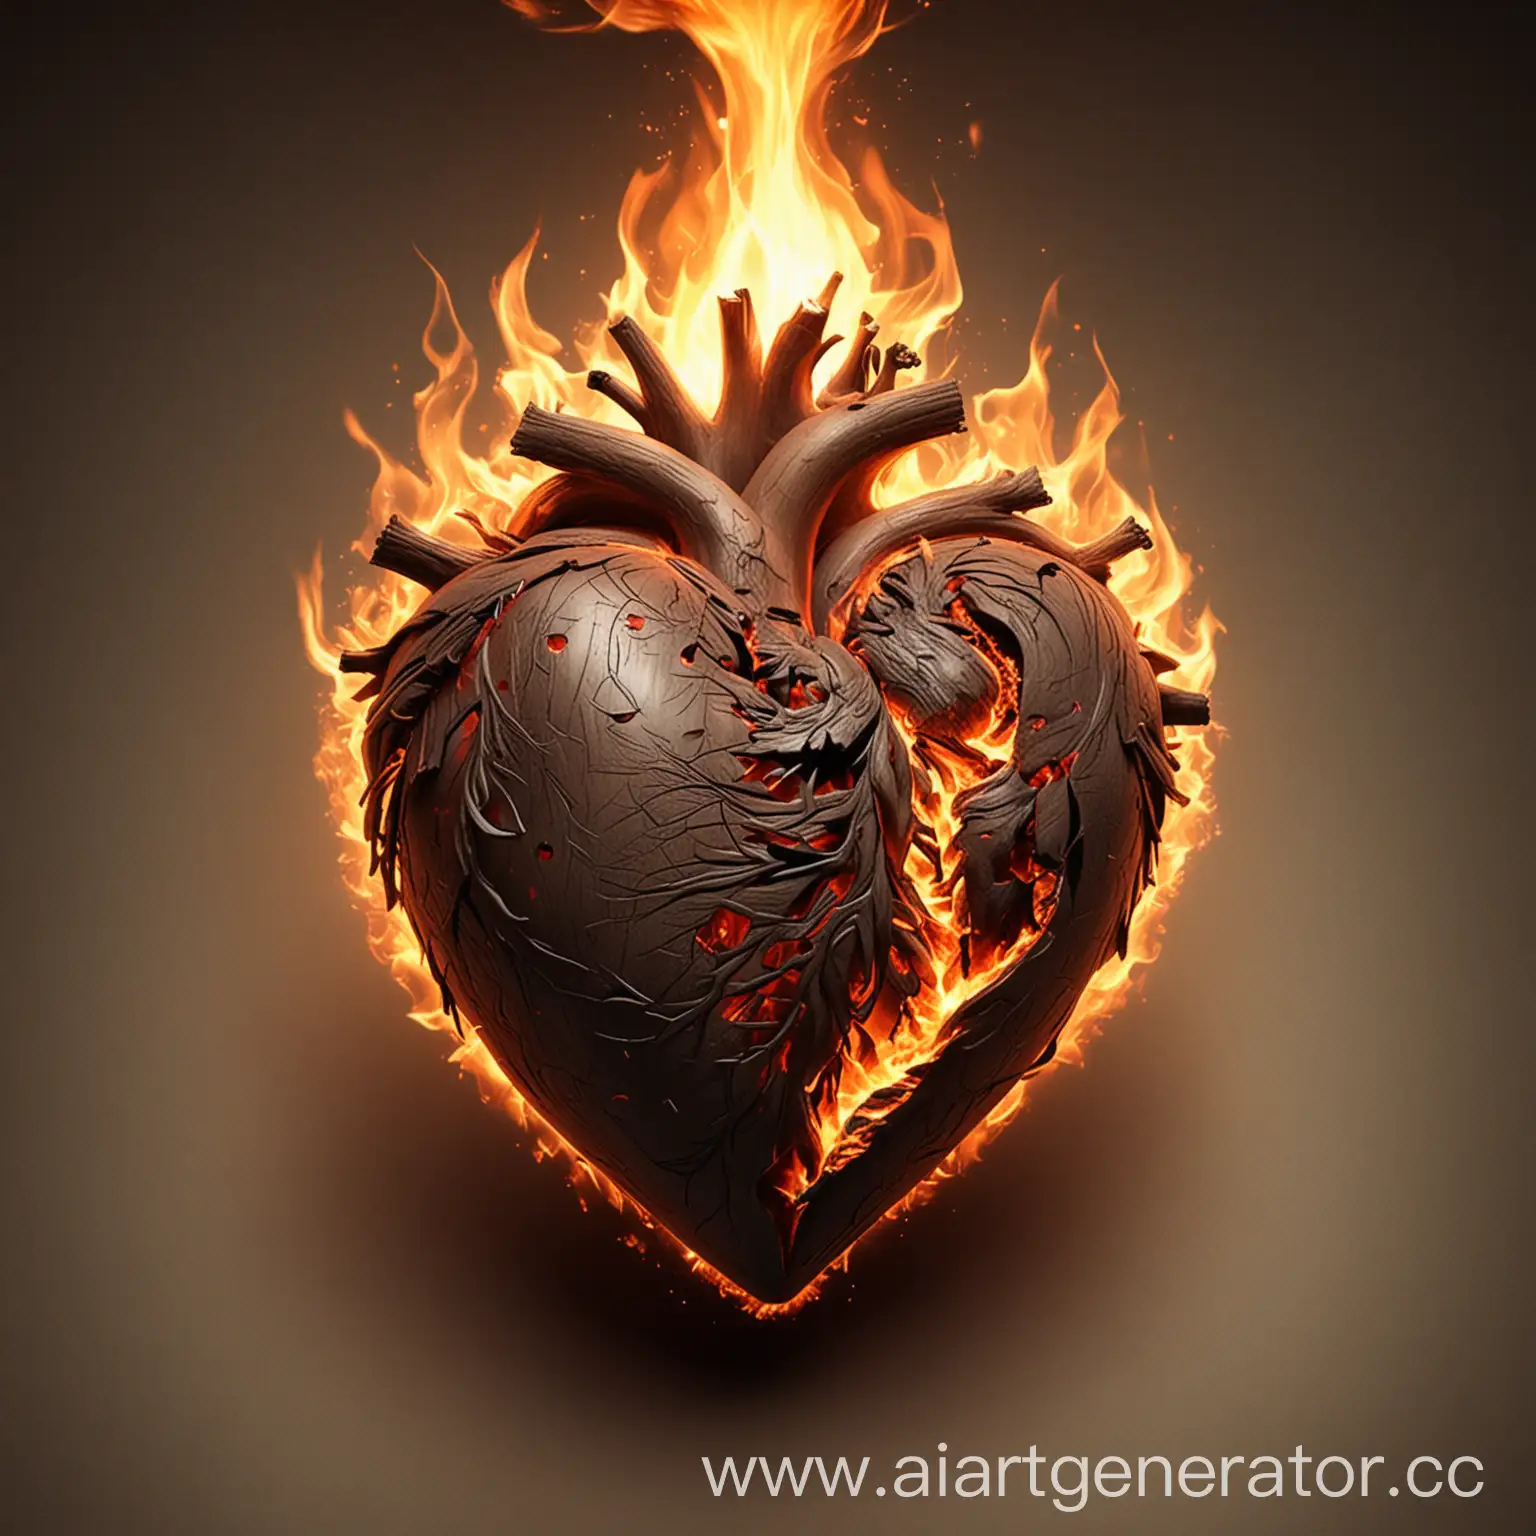 Eternal-Flames-of-Love-Expressions-of-Affection-Across-Generations